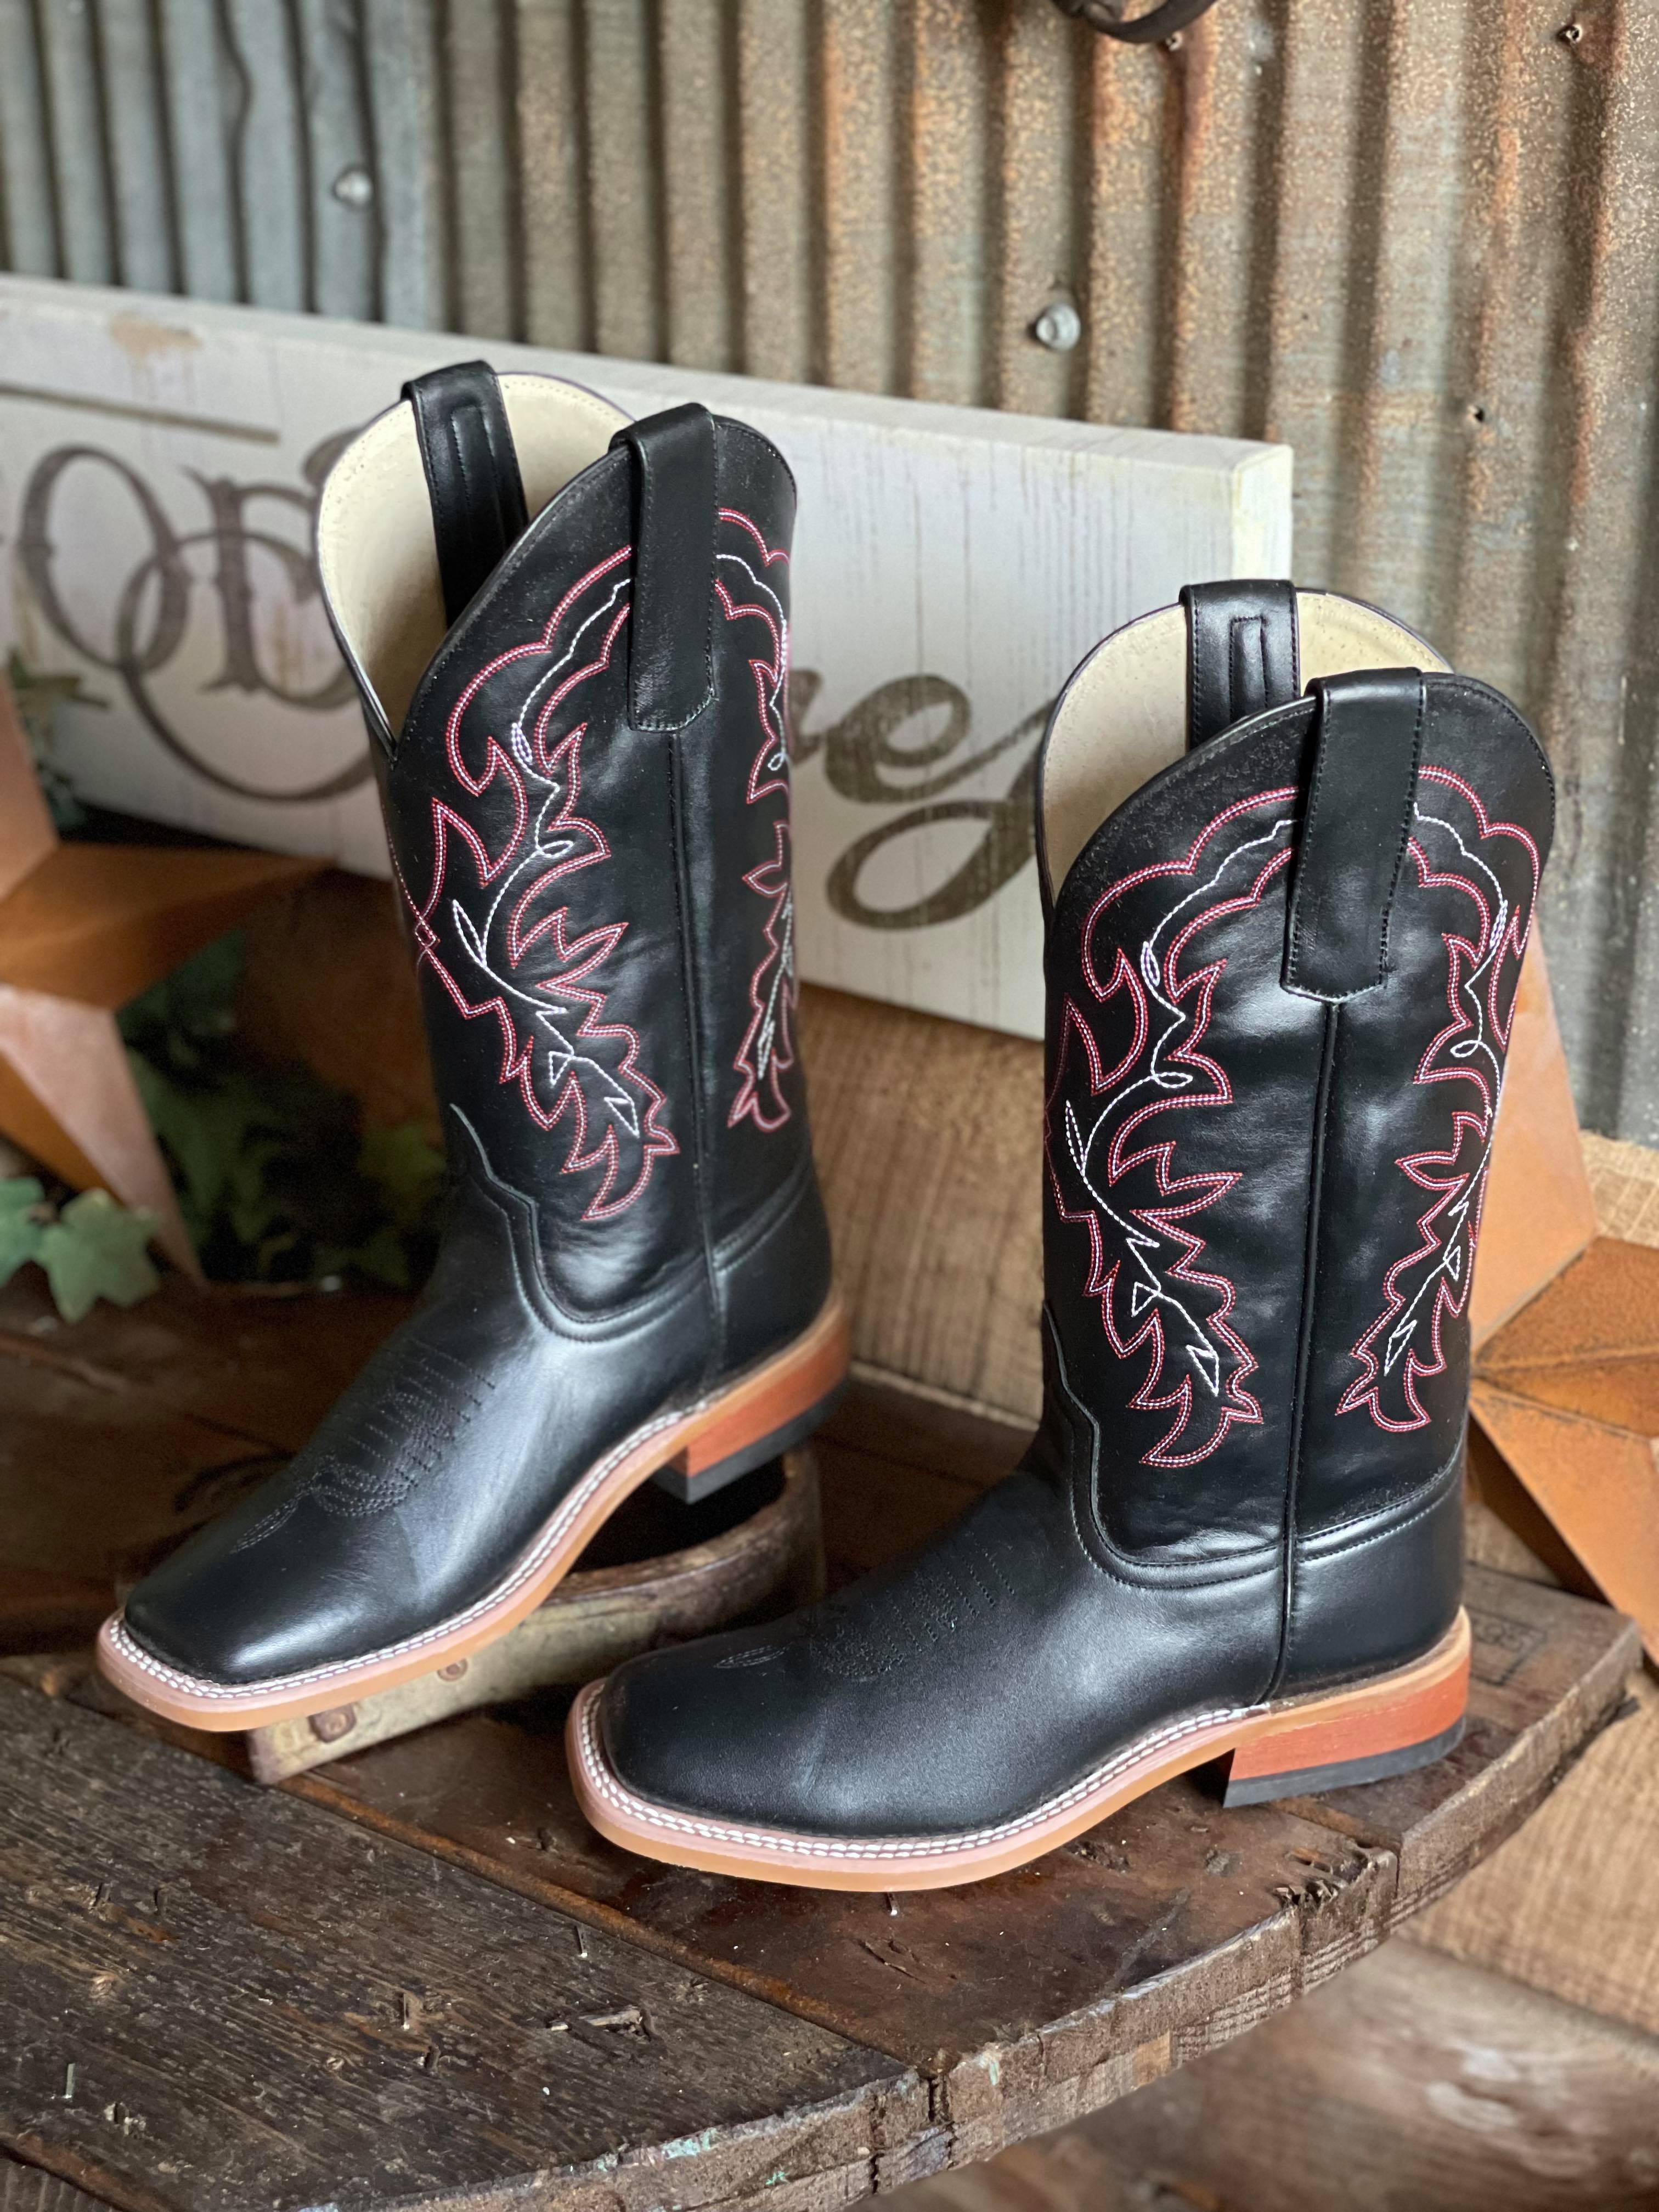 AB Youth Black Magic Square Toe Boots-Kids Boots-Anderson Bean-Lucky J Boots & More, Women's, Men's, & Kids Western Store Located in Carthage, MO